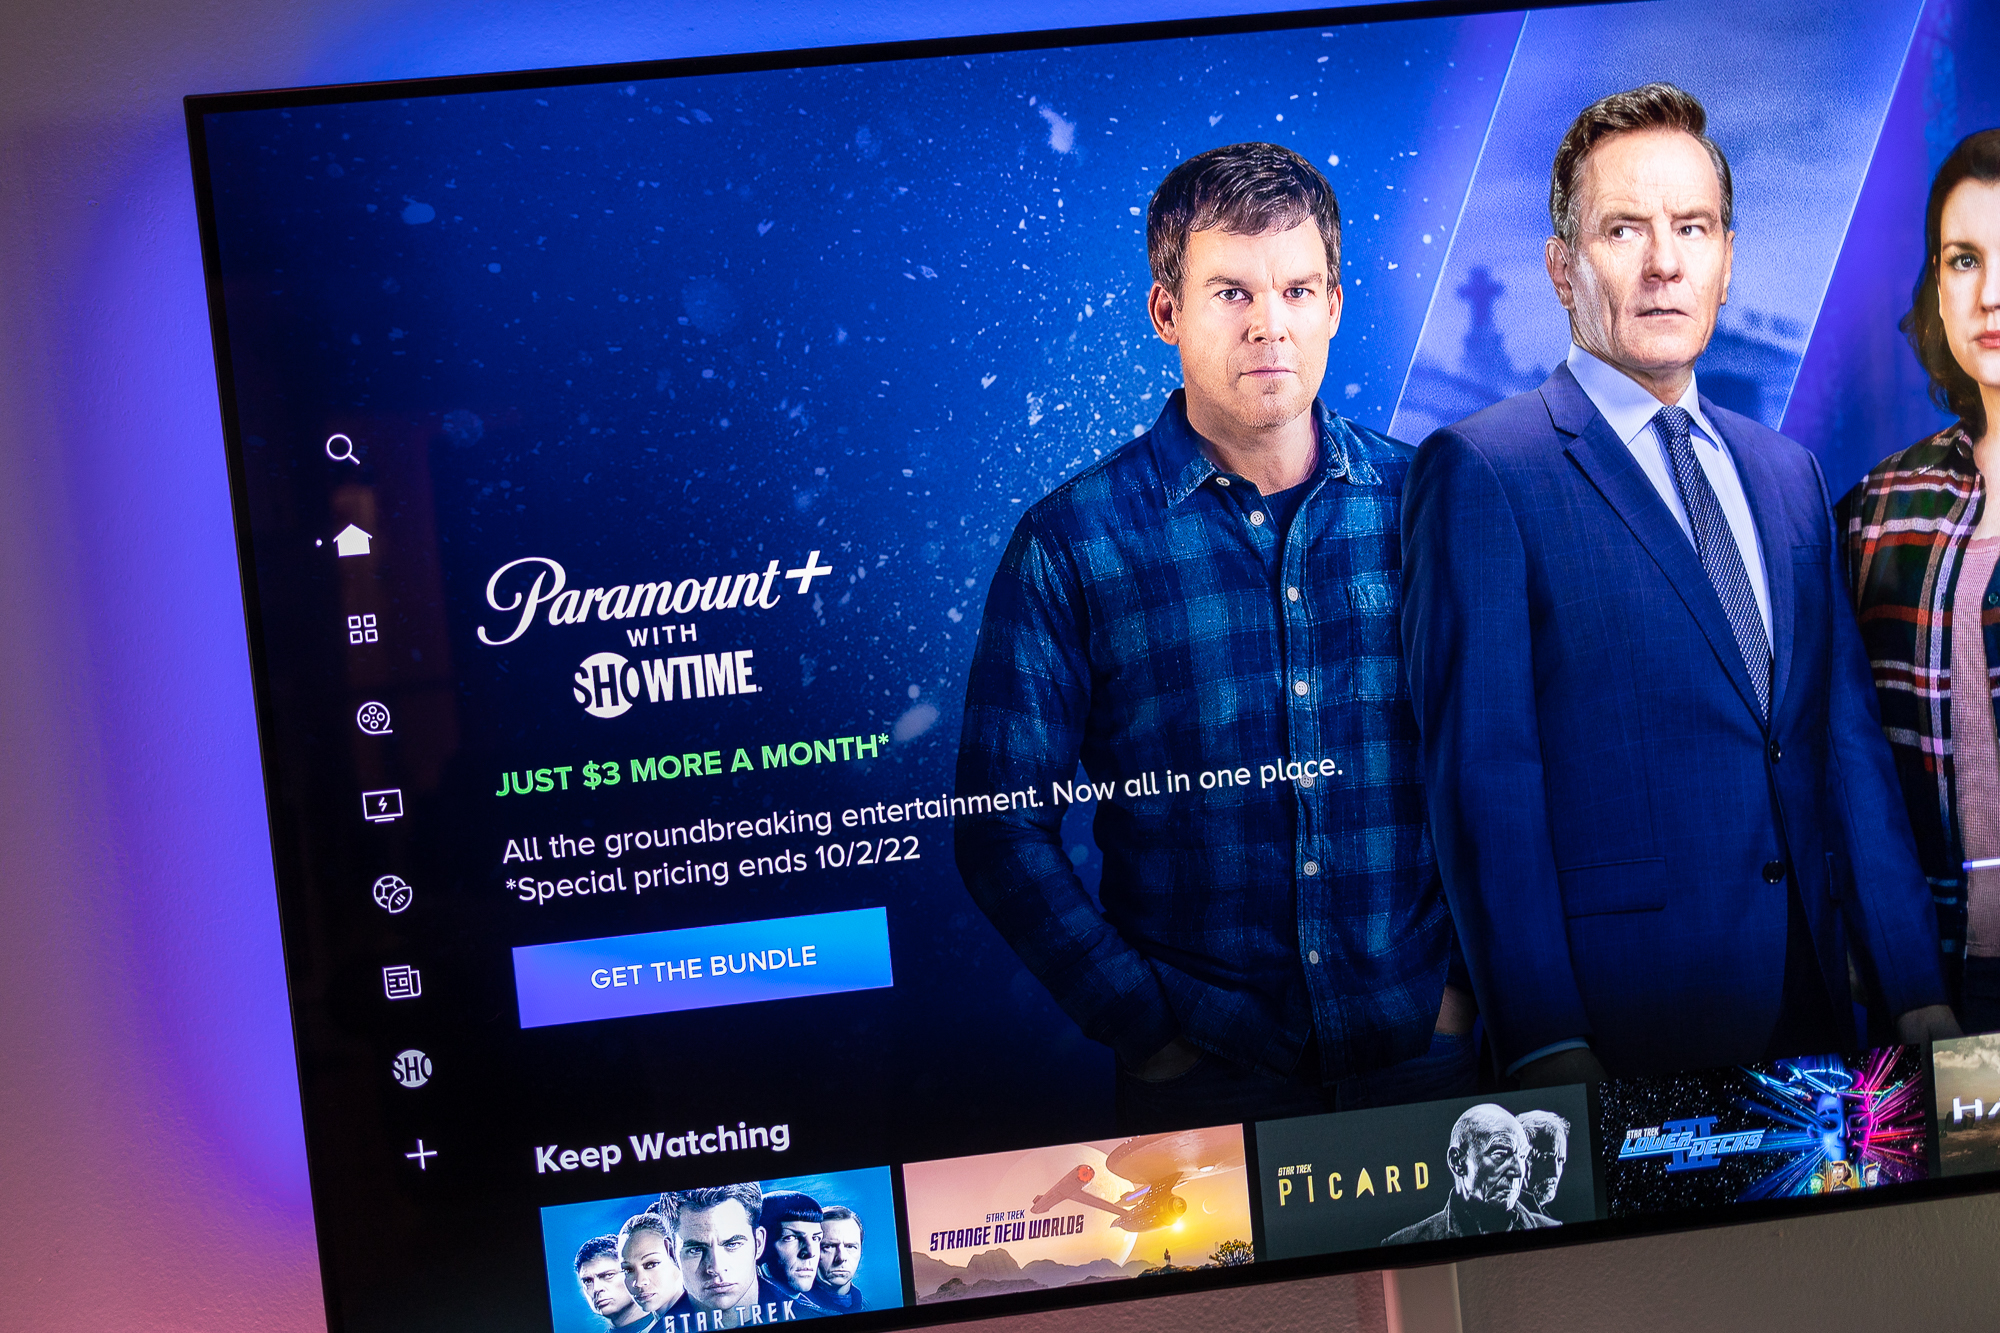 Live TV Streaming, On Demand, and Originals on Paramount Plus